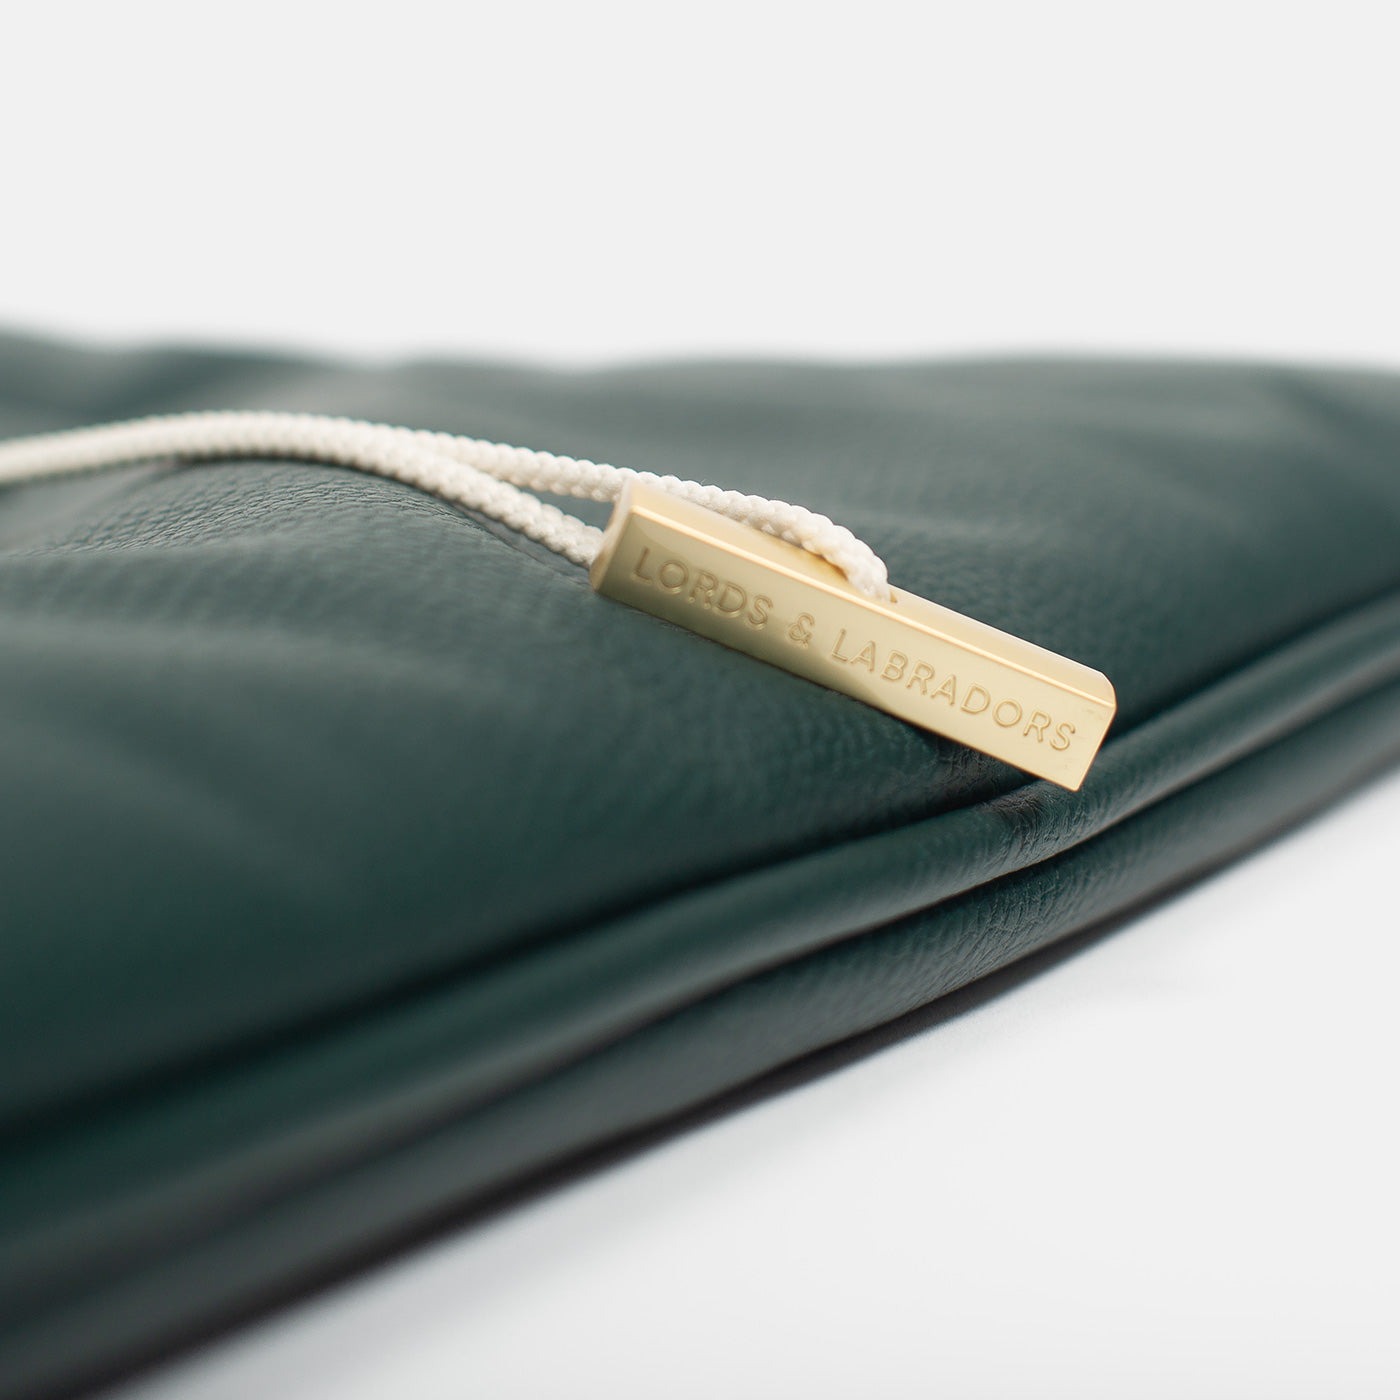 Embark on the perfect pet travel with our luxury Travel Mat in Rhino Forest (Green). Featuring a Carry handle for on the move once Rolled up for easy storage, can be used as a seat cover, boot mat or travel bed! Available now at Lords & Labradors 